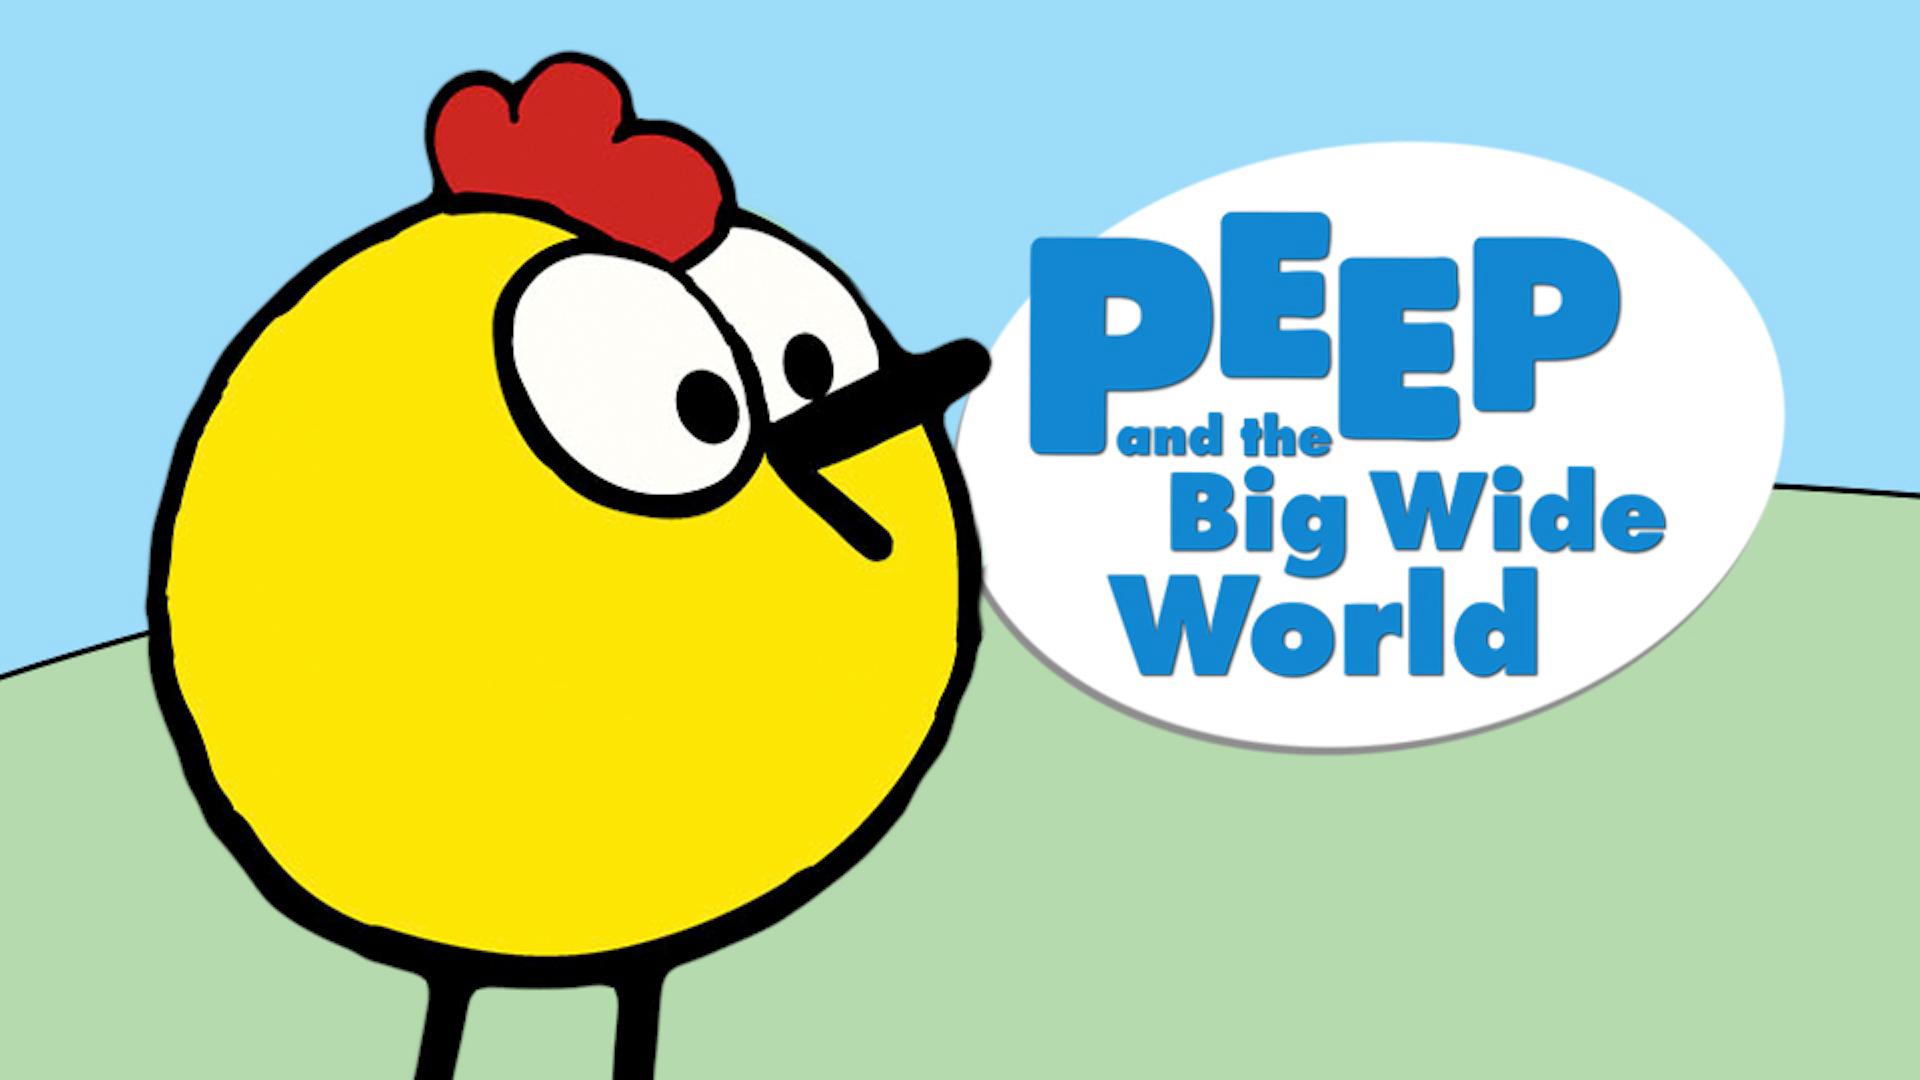 The Big Wide World Peep And Chirp